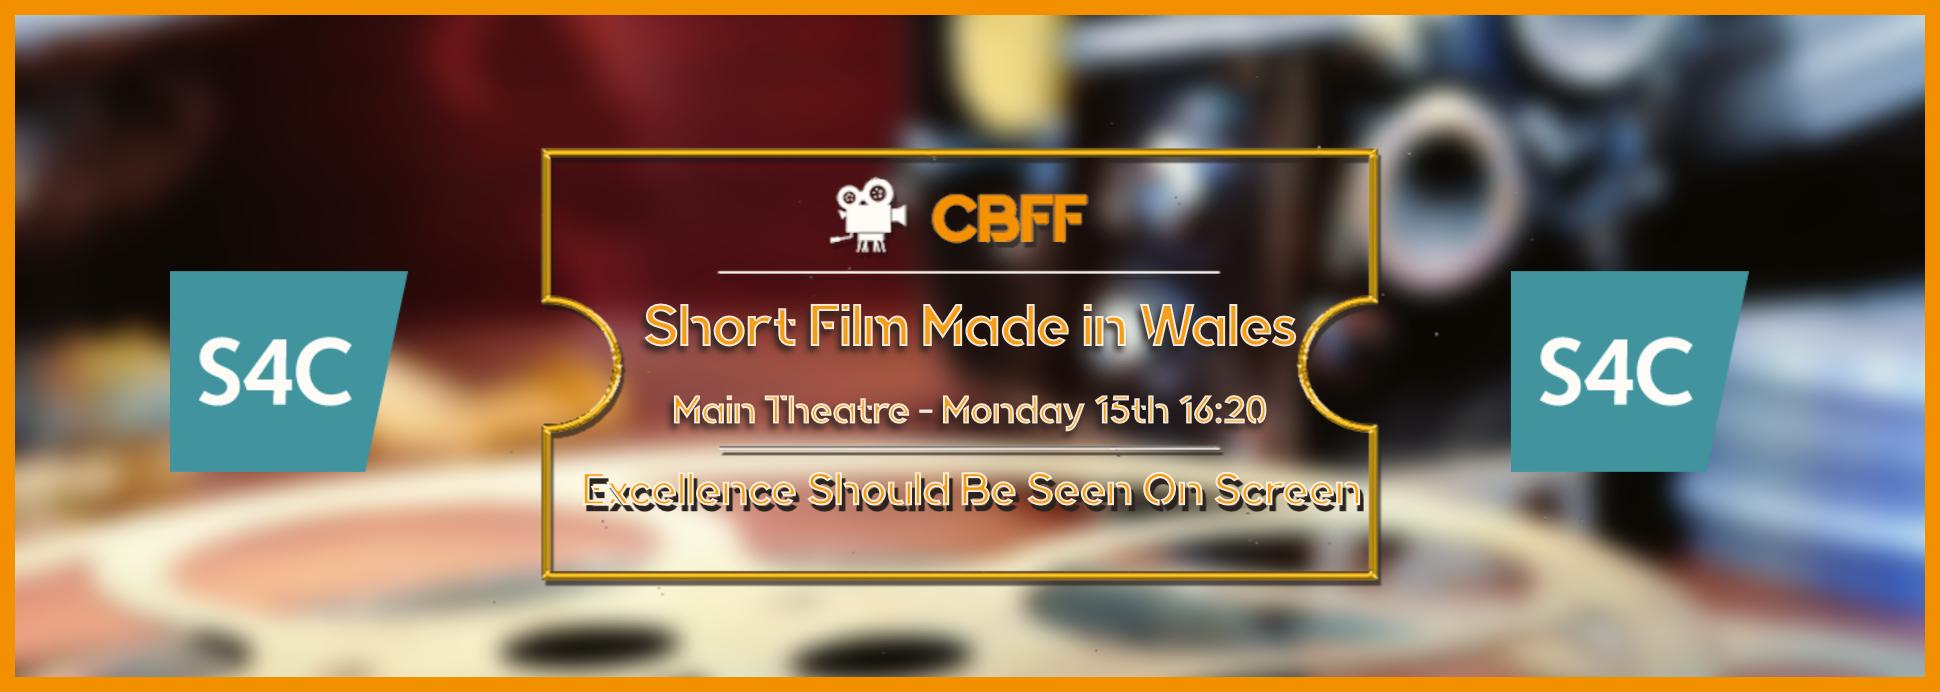 Main Theatre Short Film Made in Wales 15th 16:20